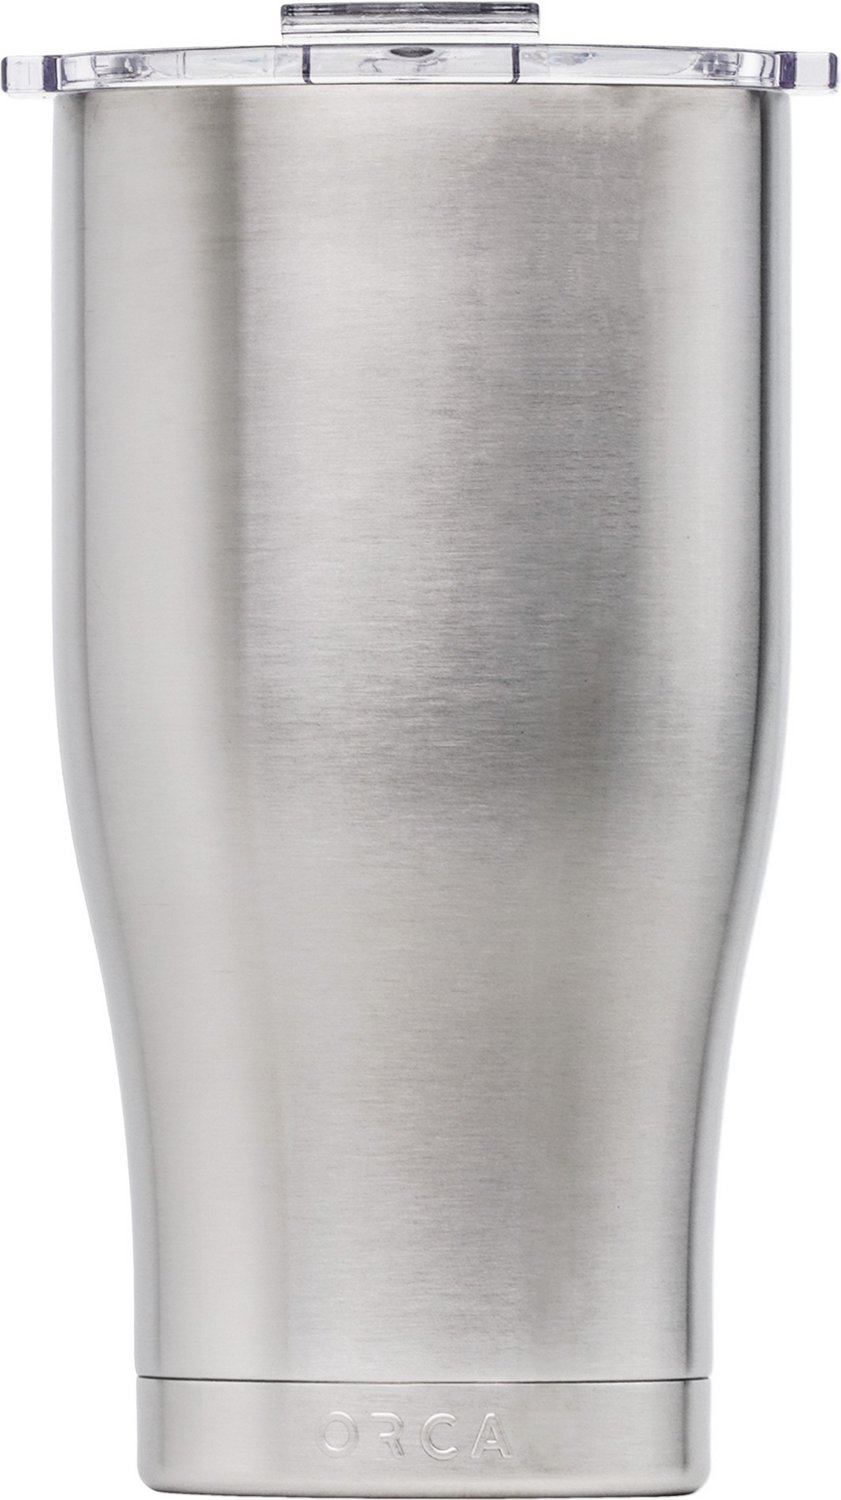 ORCA Chaser Tumbler NEW 27oz Insulated Silver Stainless Steel BPA